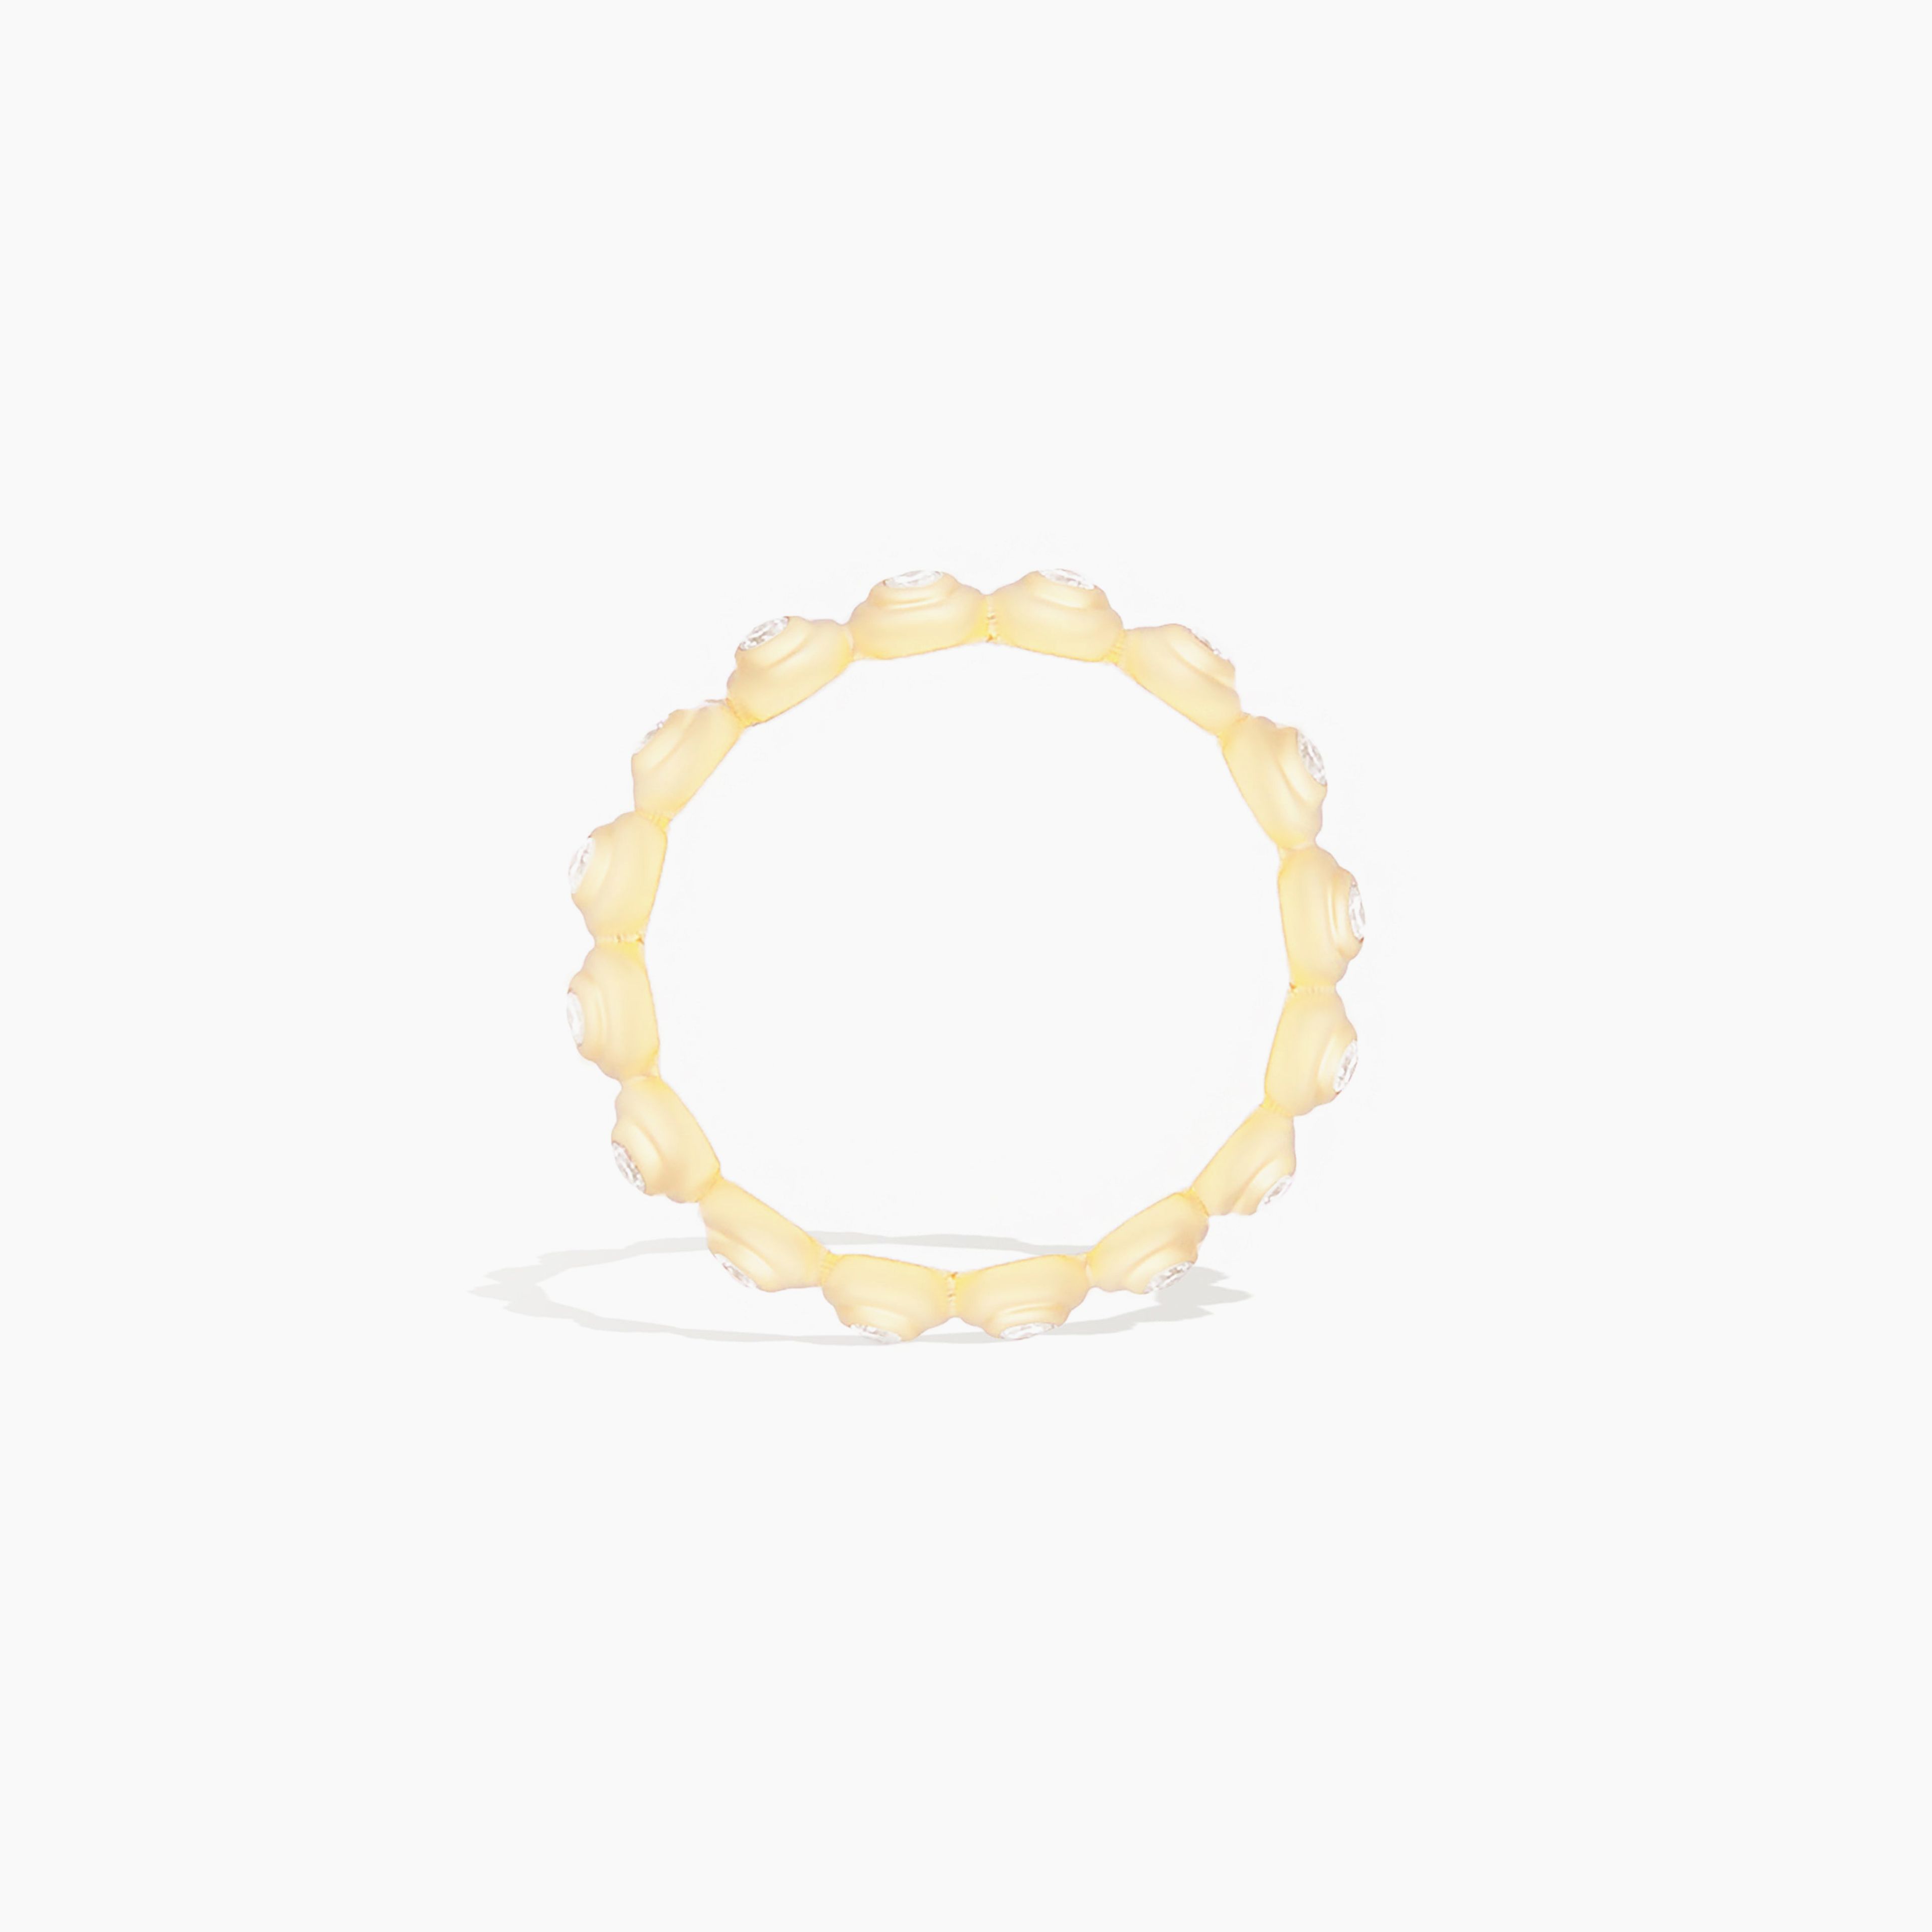 Evolve Stacking Ring - Small (Diamond)